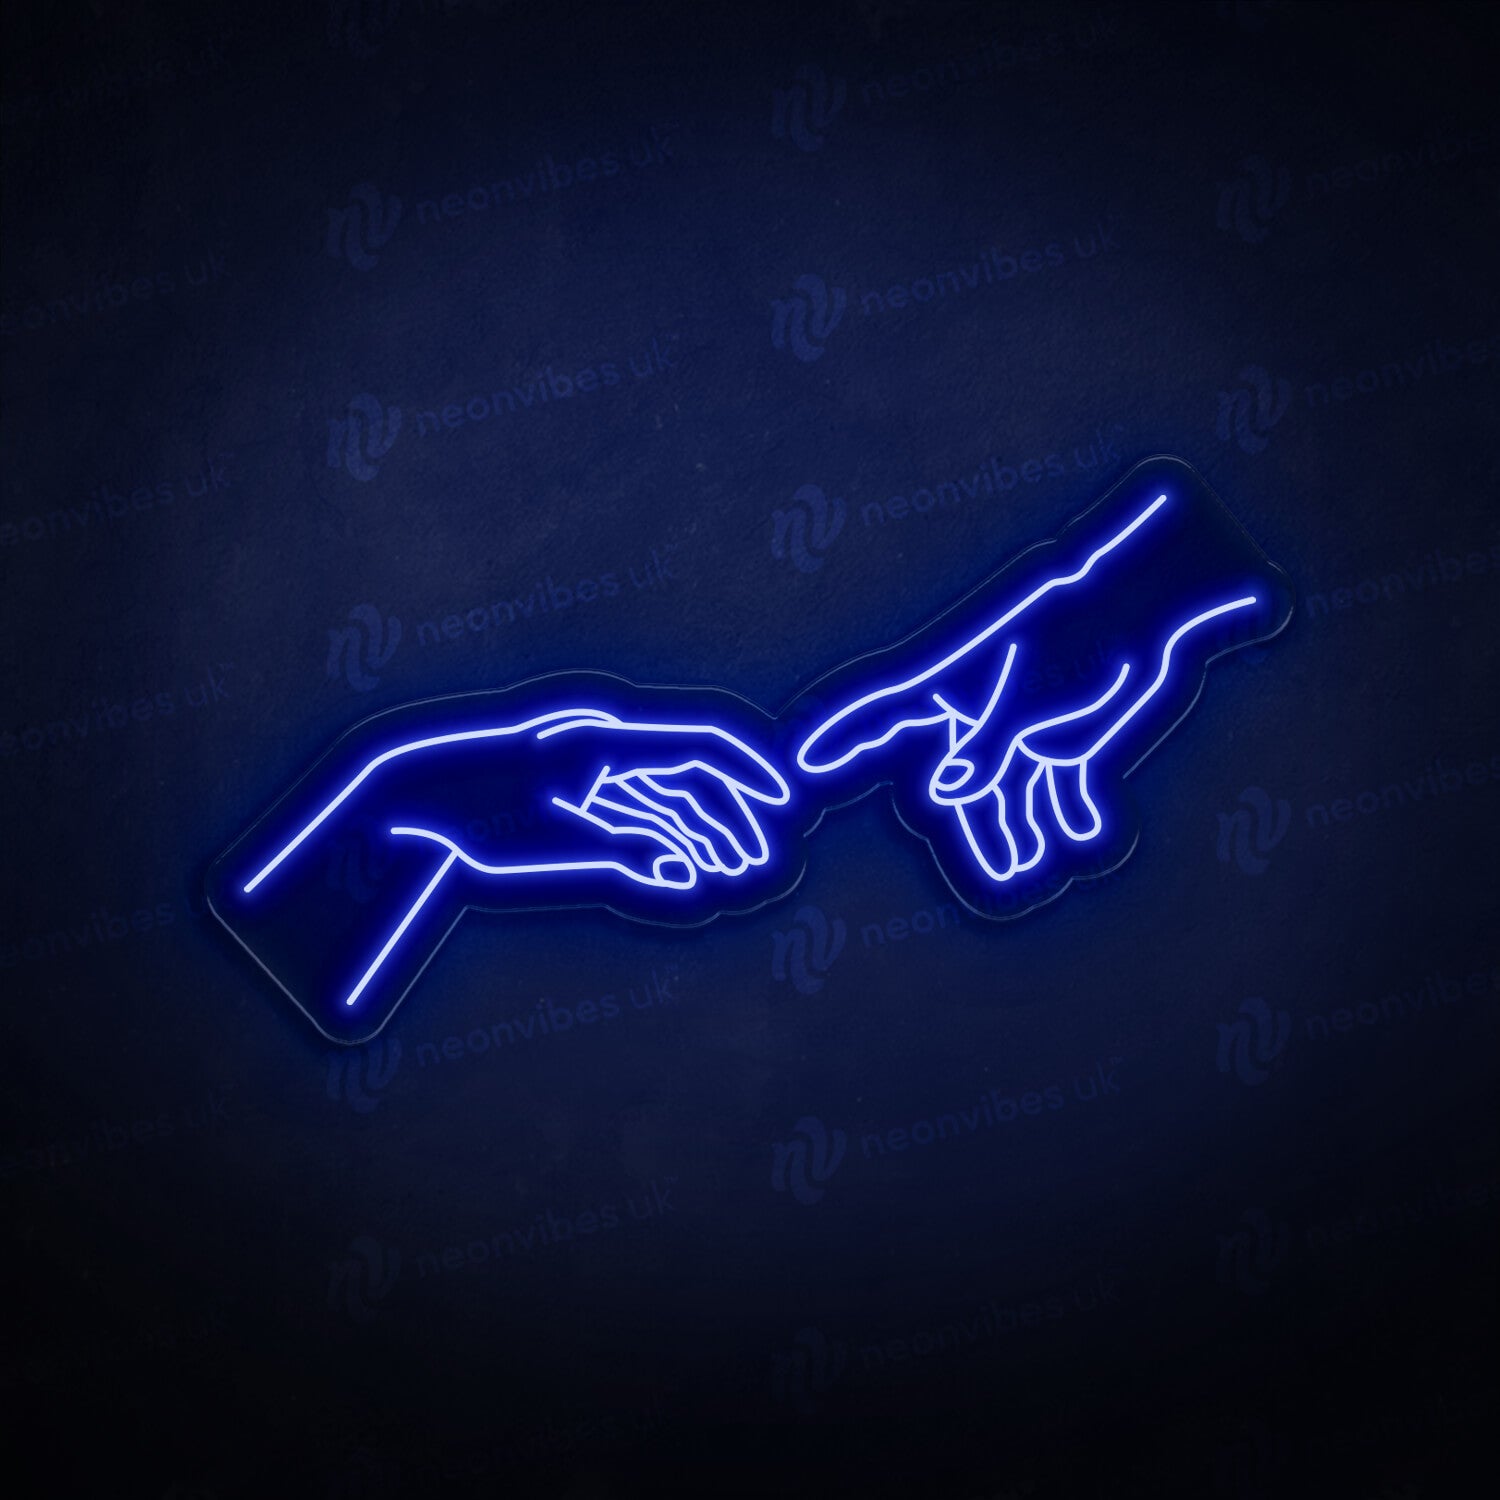 Hand Of God neon sign - V2 - Neon Vibes® neon signs